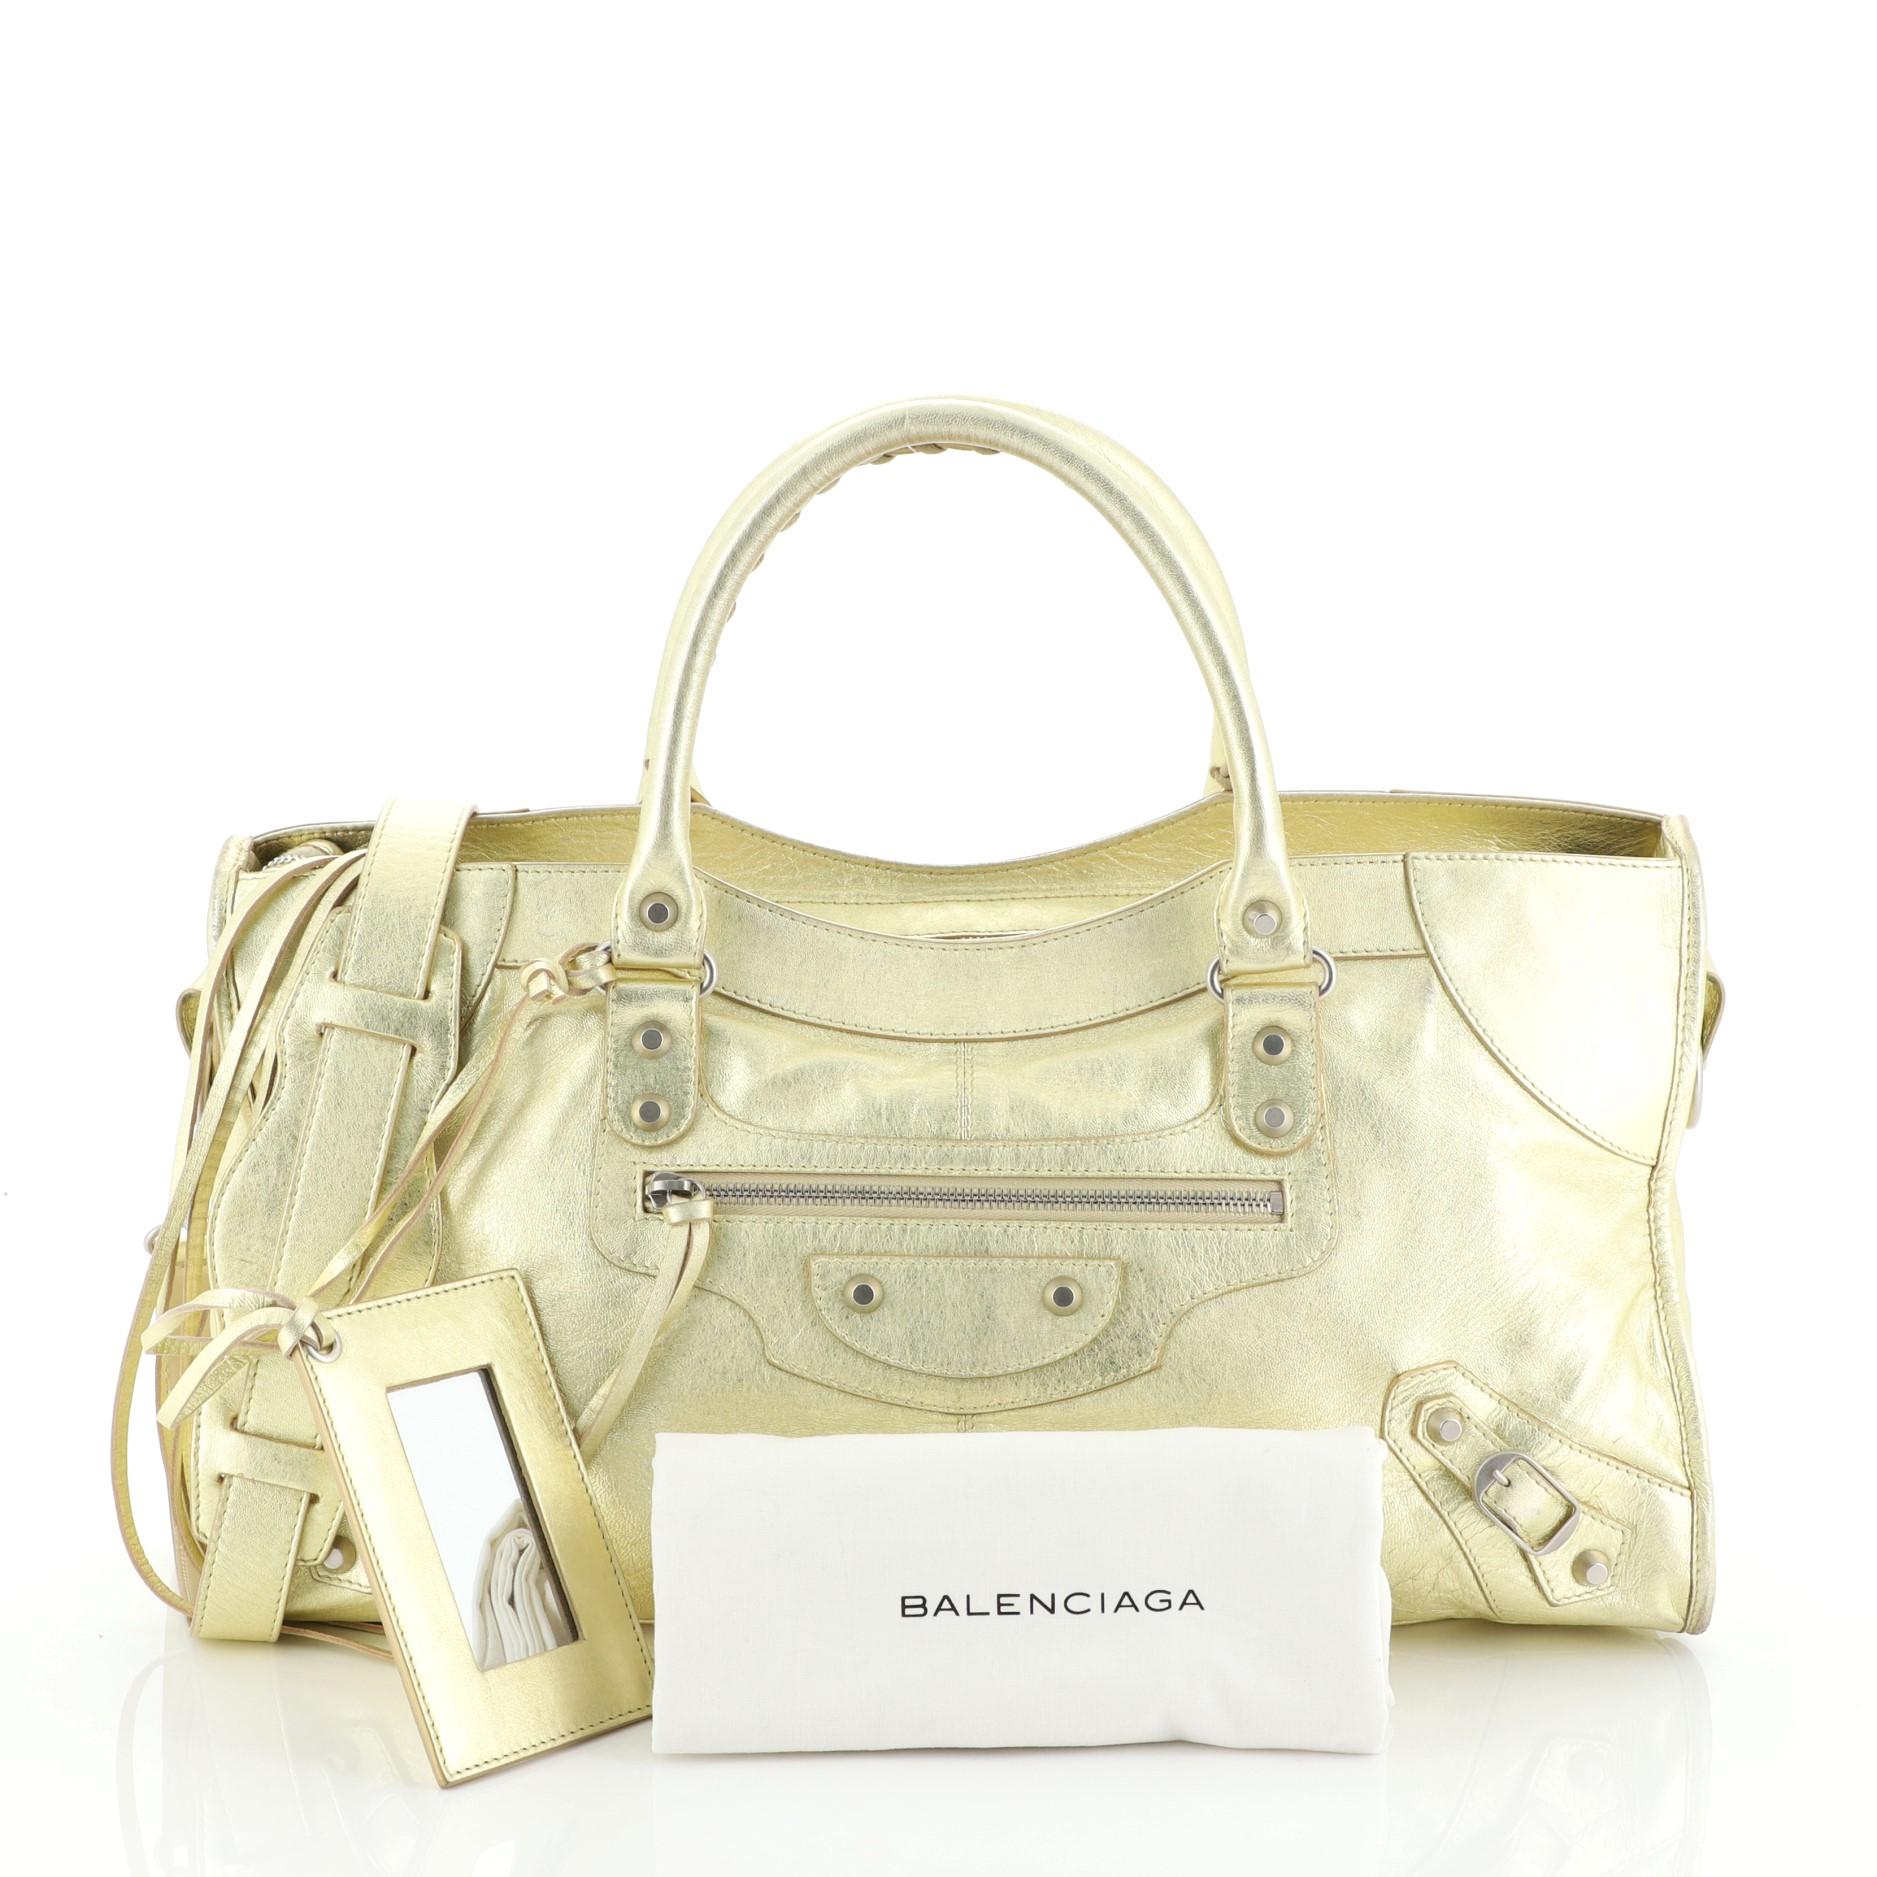 This Balenciaga Part Time Classic Studs Bag Leather, crafted from gold leather, features dual braided woven handles, classic studs and buckle details, front zip pocket, and silver-tone hardware. Its top zip closure opens to a black fabric interior